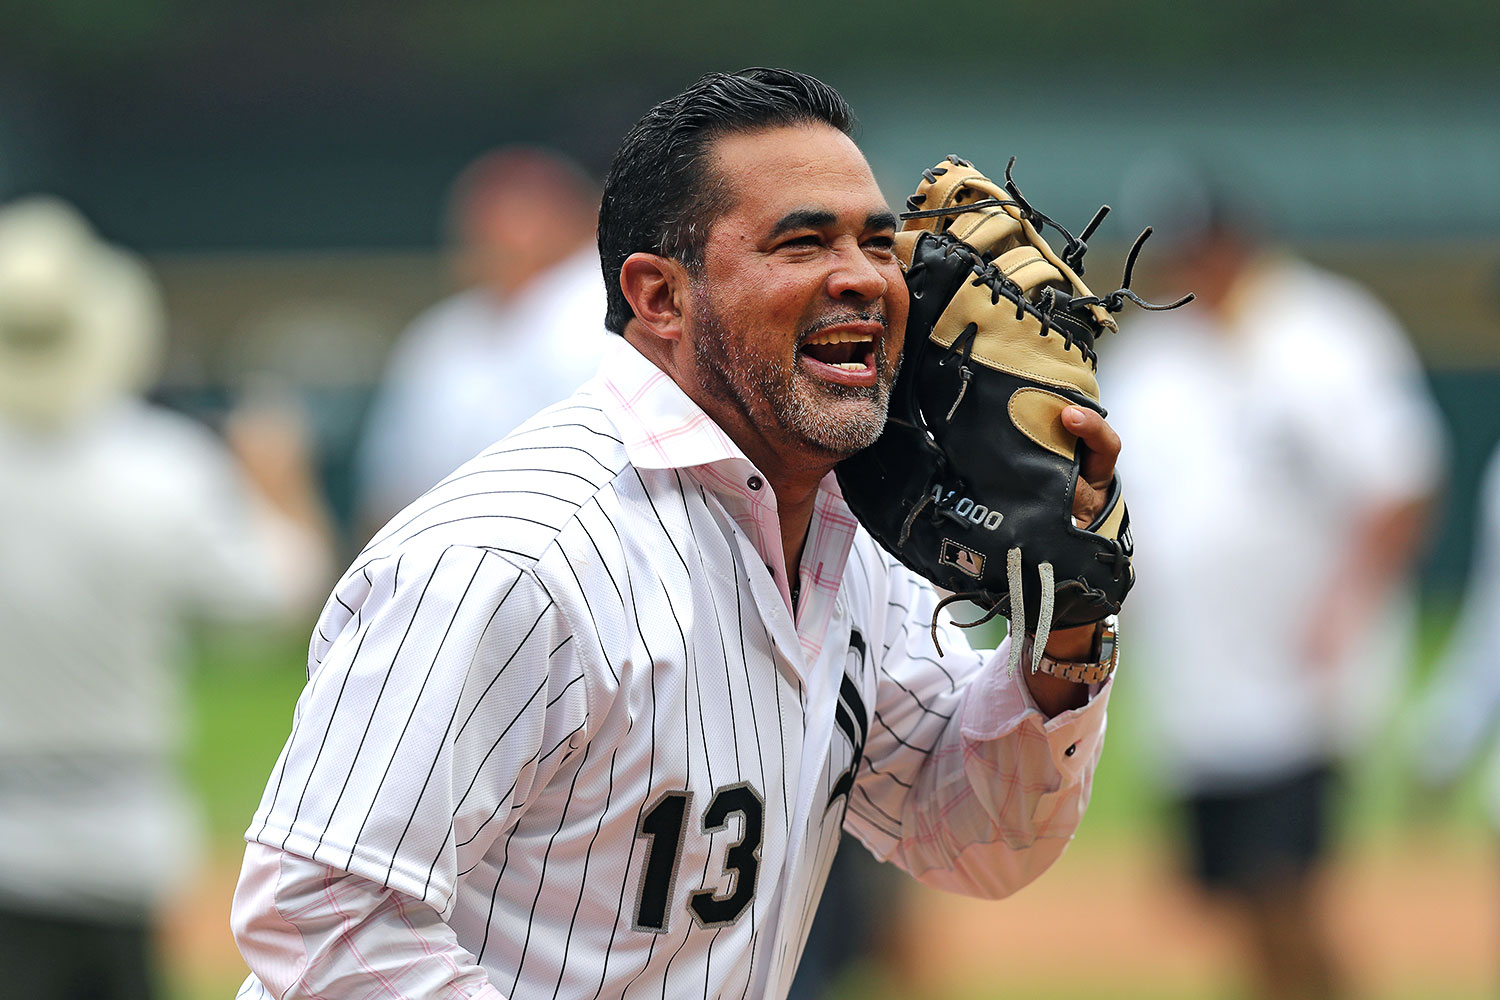 The R-Rated Yogi: The 25 Most Memorable Ozzie Guillen Quotes of All-Time, News, Scores, Highlights, Stats, and Rumors